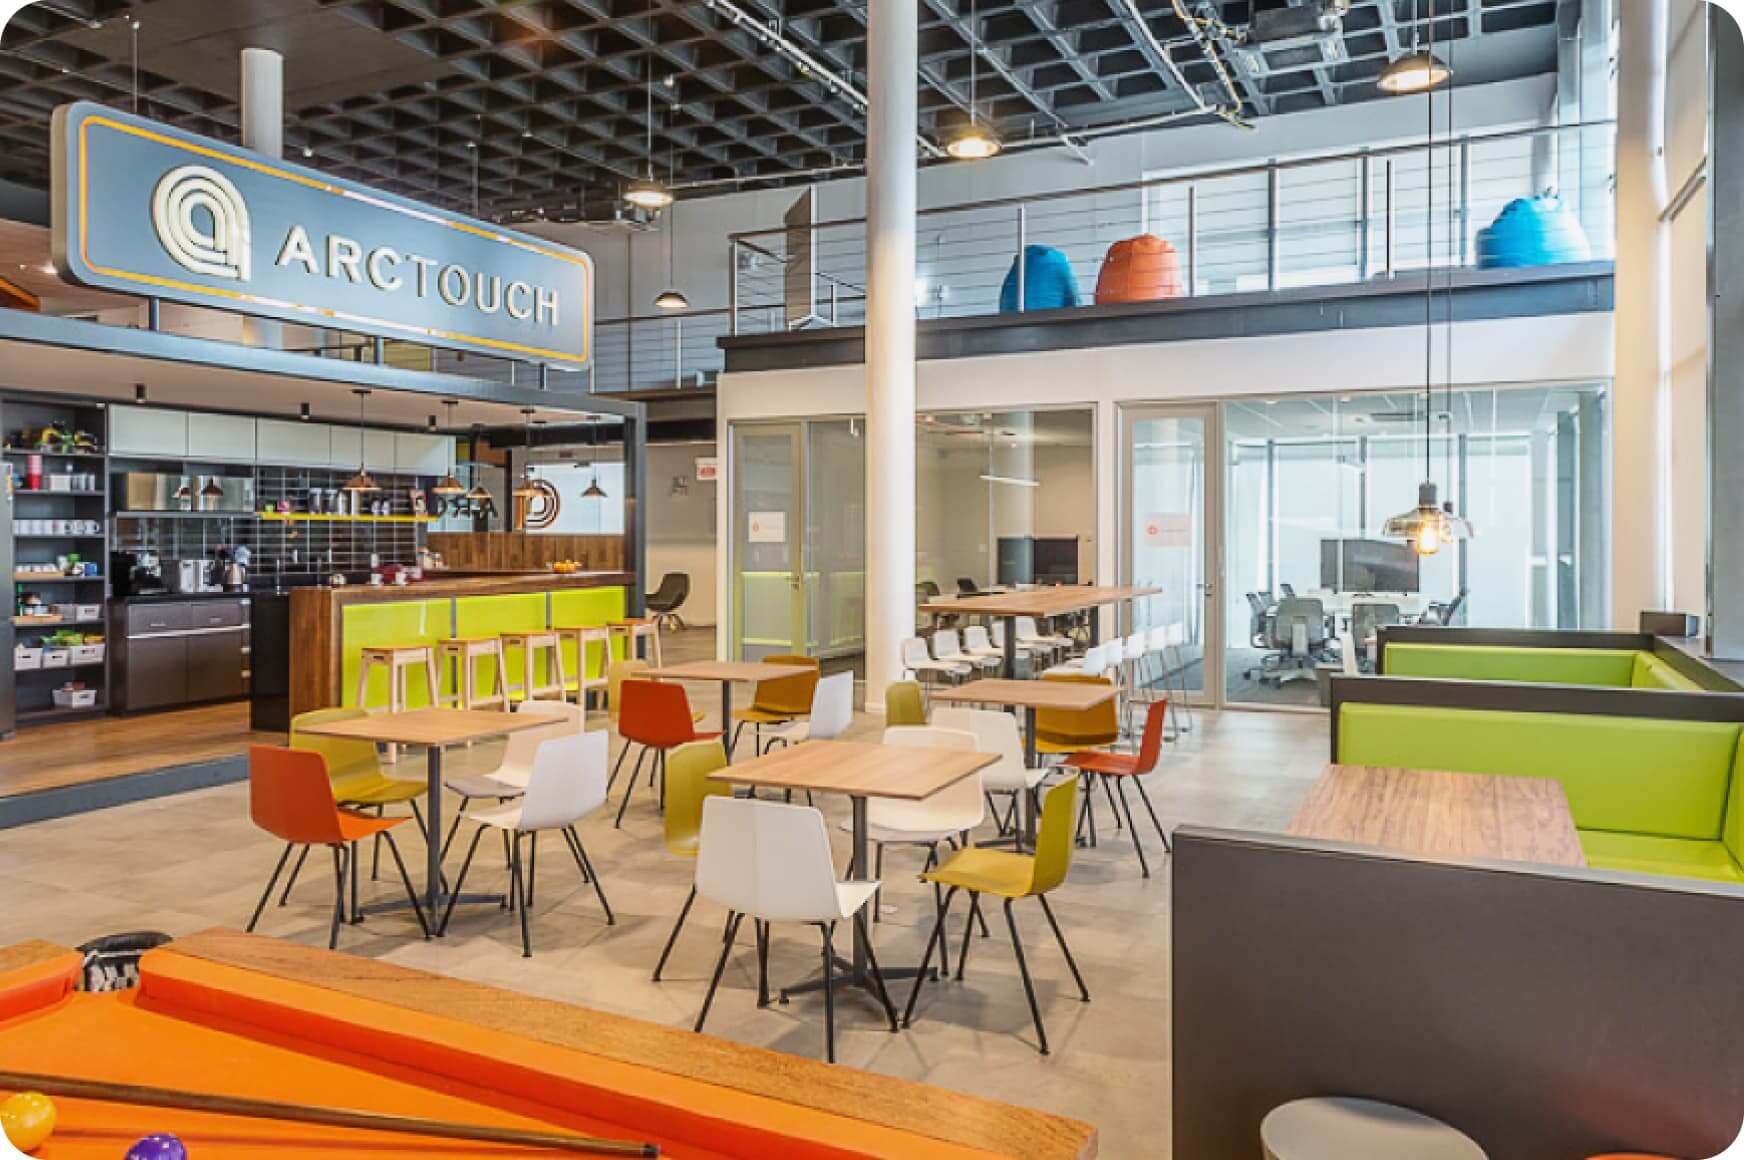 ArcTouch's office features a modern space with a kitchen area, various colored chairs and tables, and a pool table in the foreground. A large sign overhead reads "ARCTOUCH." An upper level with bean bags is also visible.